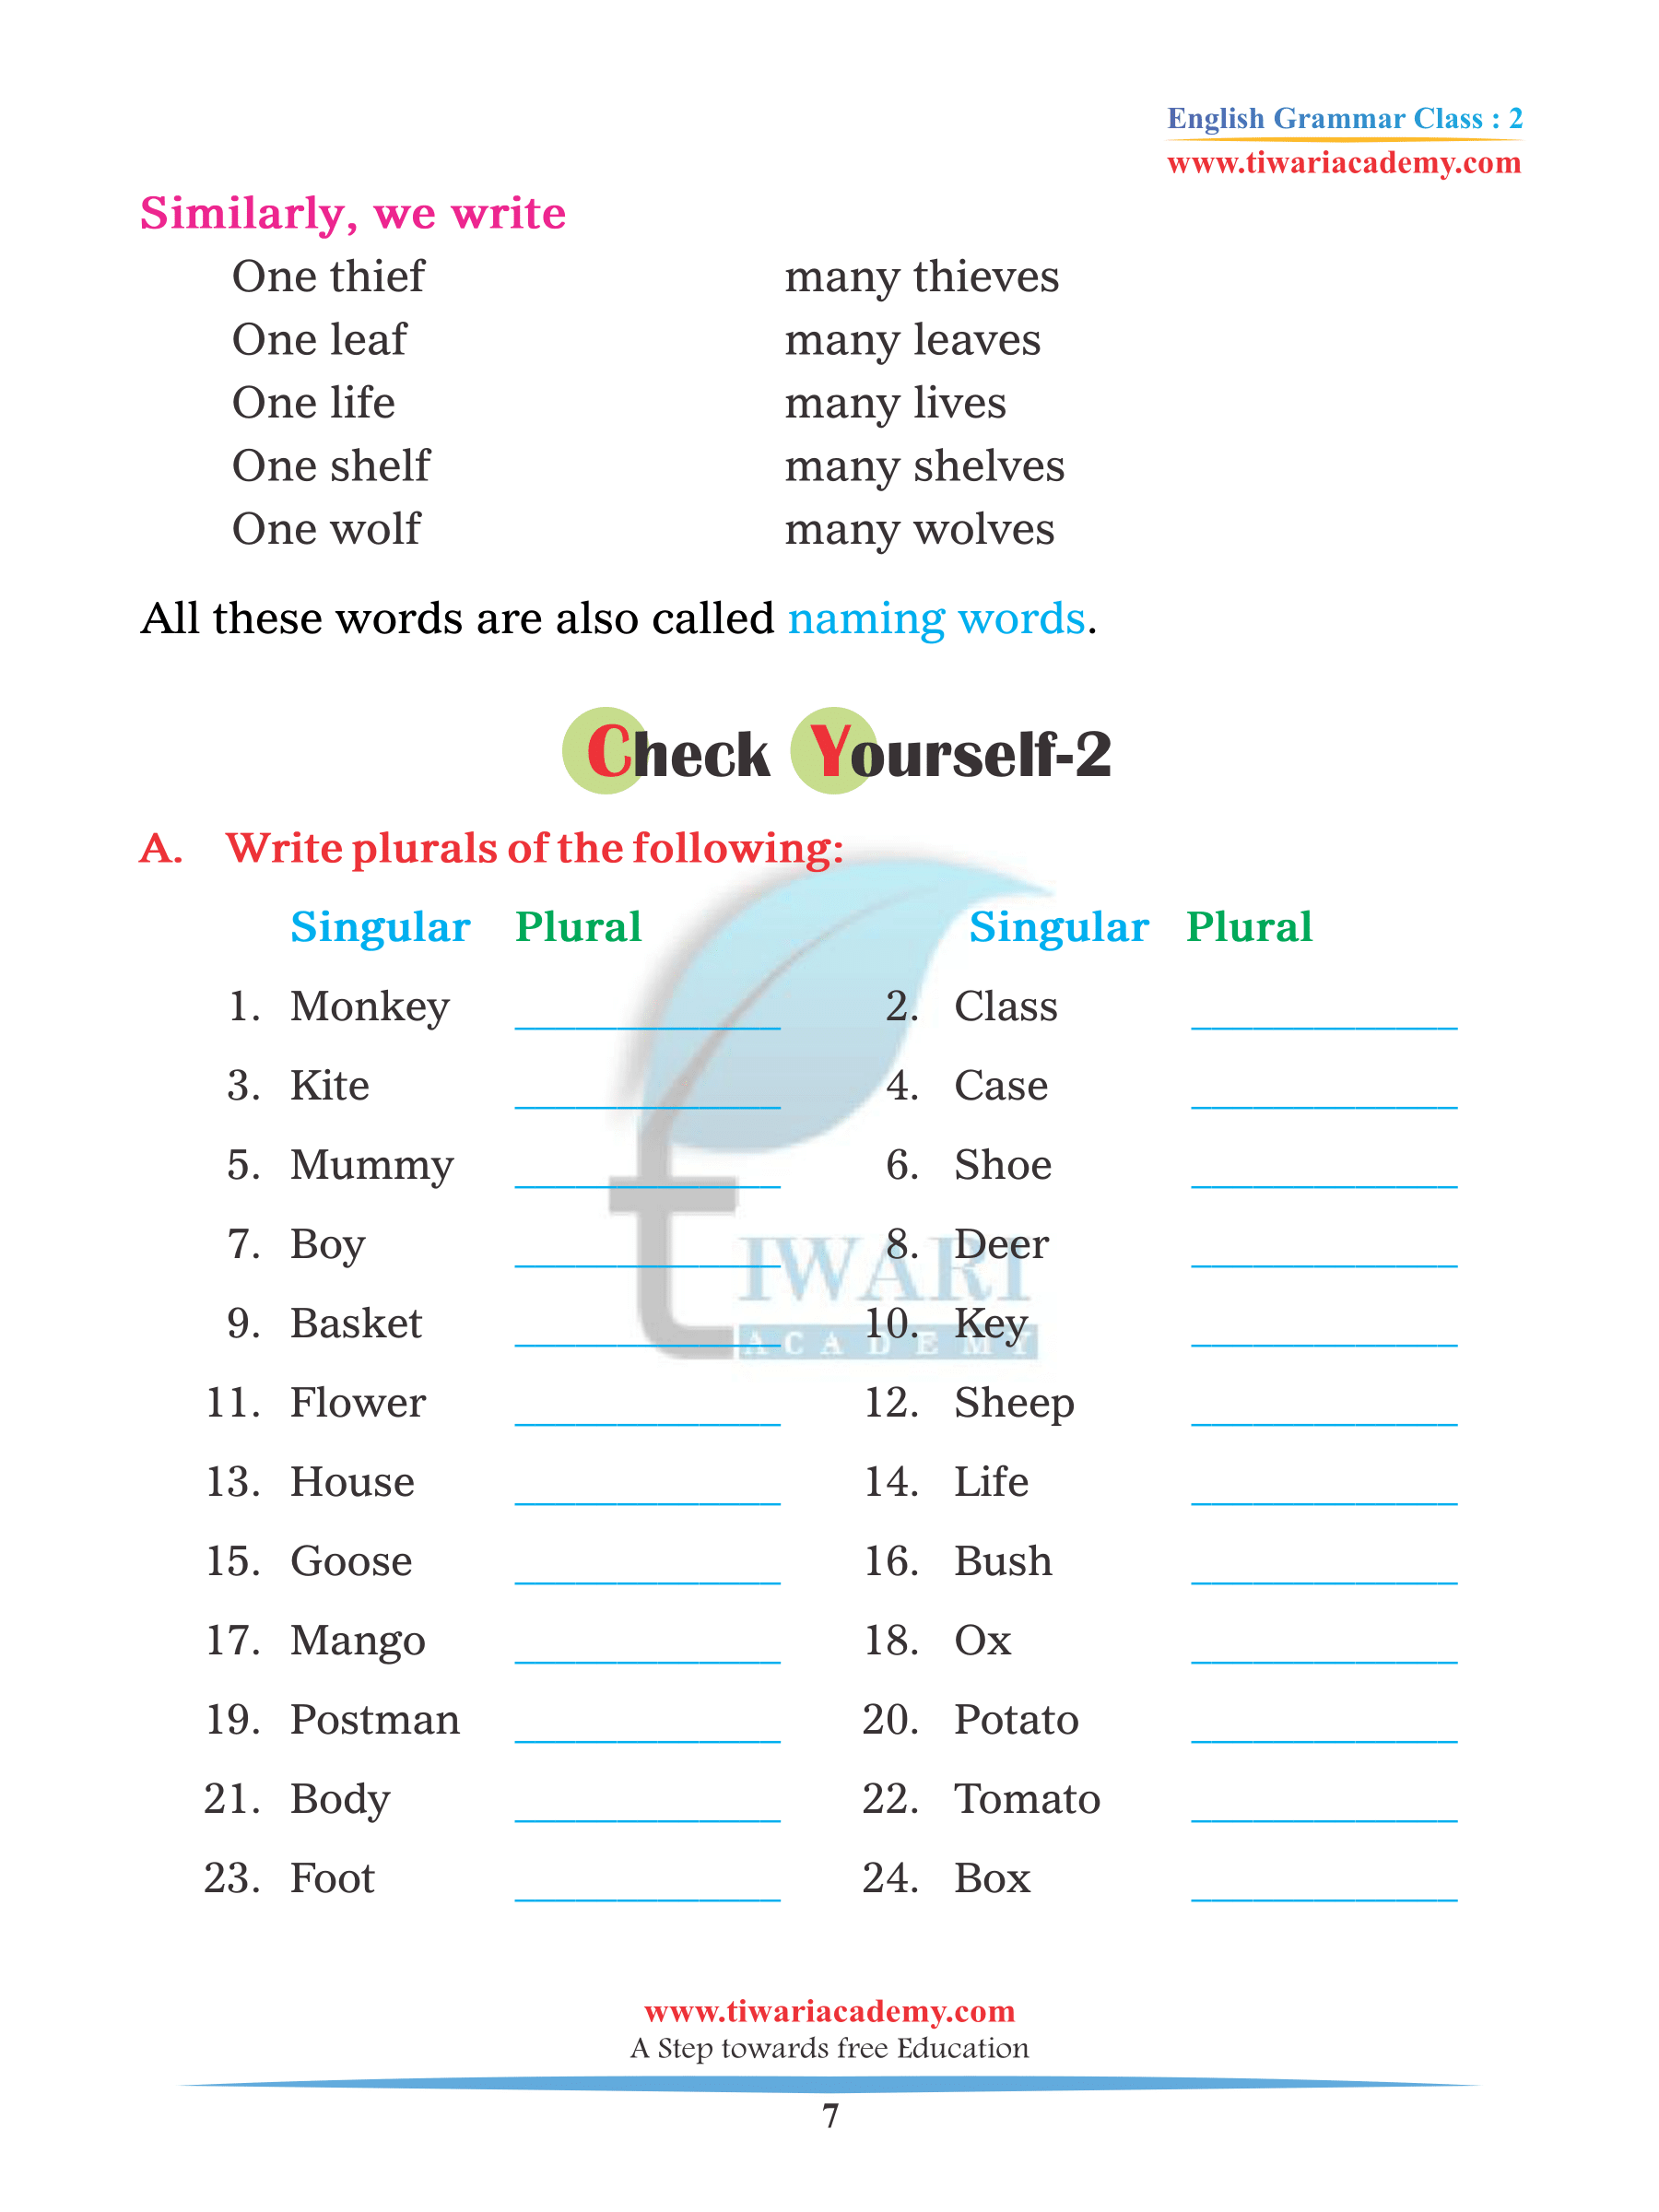 Class 2 English Grammar Chapter 2 Singular and Plural Assignments